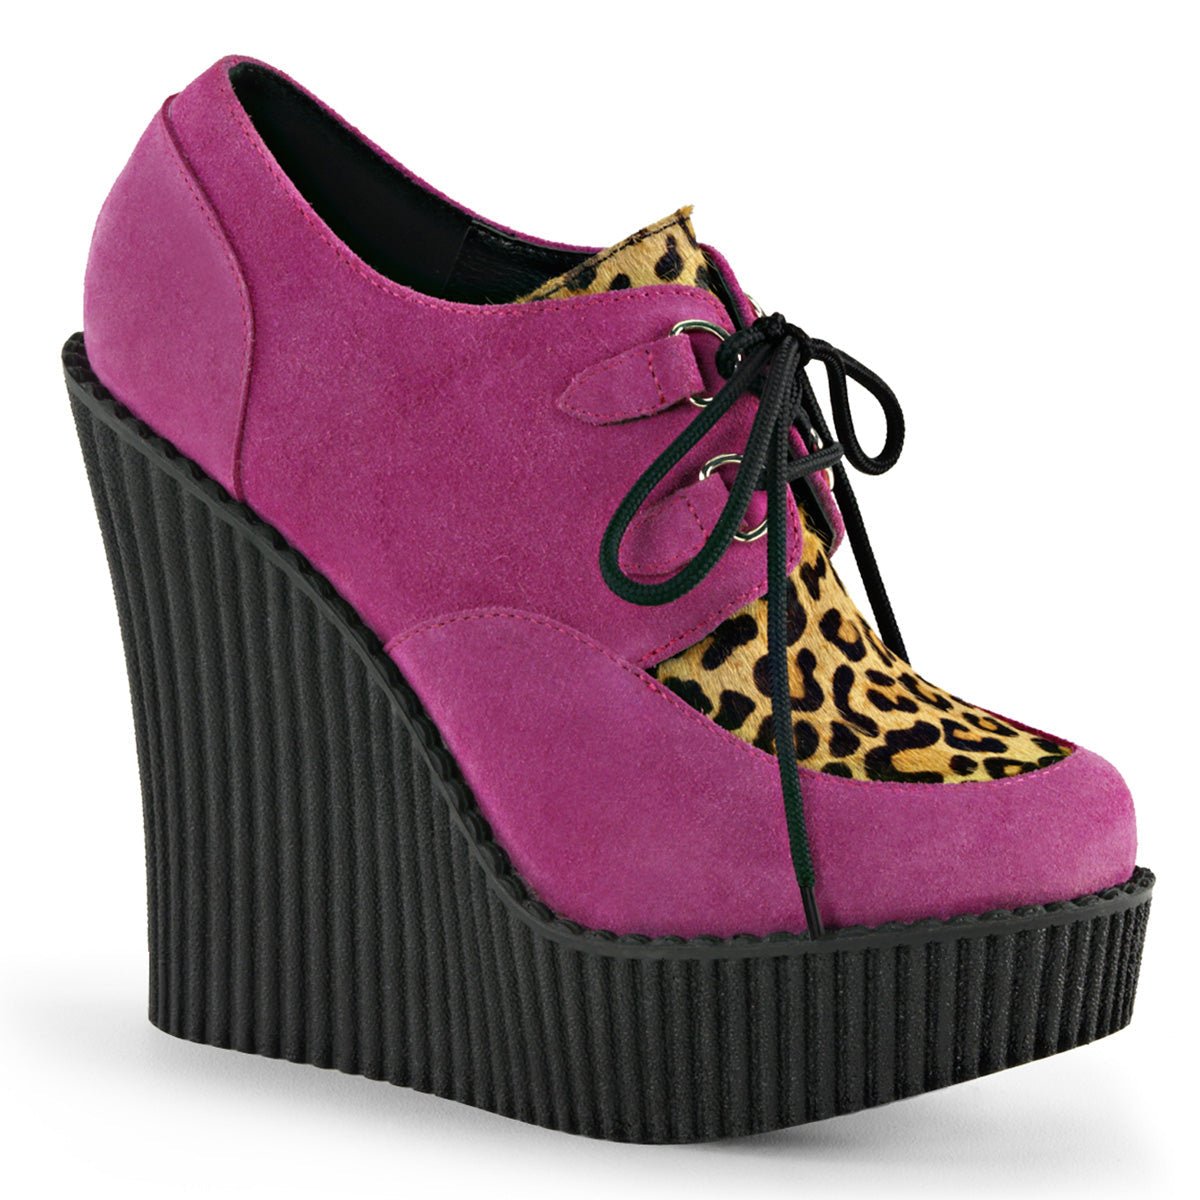 Clearance DemoniaCult Creeper 304 Hot Pink Size 4UK/7USA - From Clearance Sold By Alternative Footwear